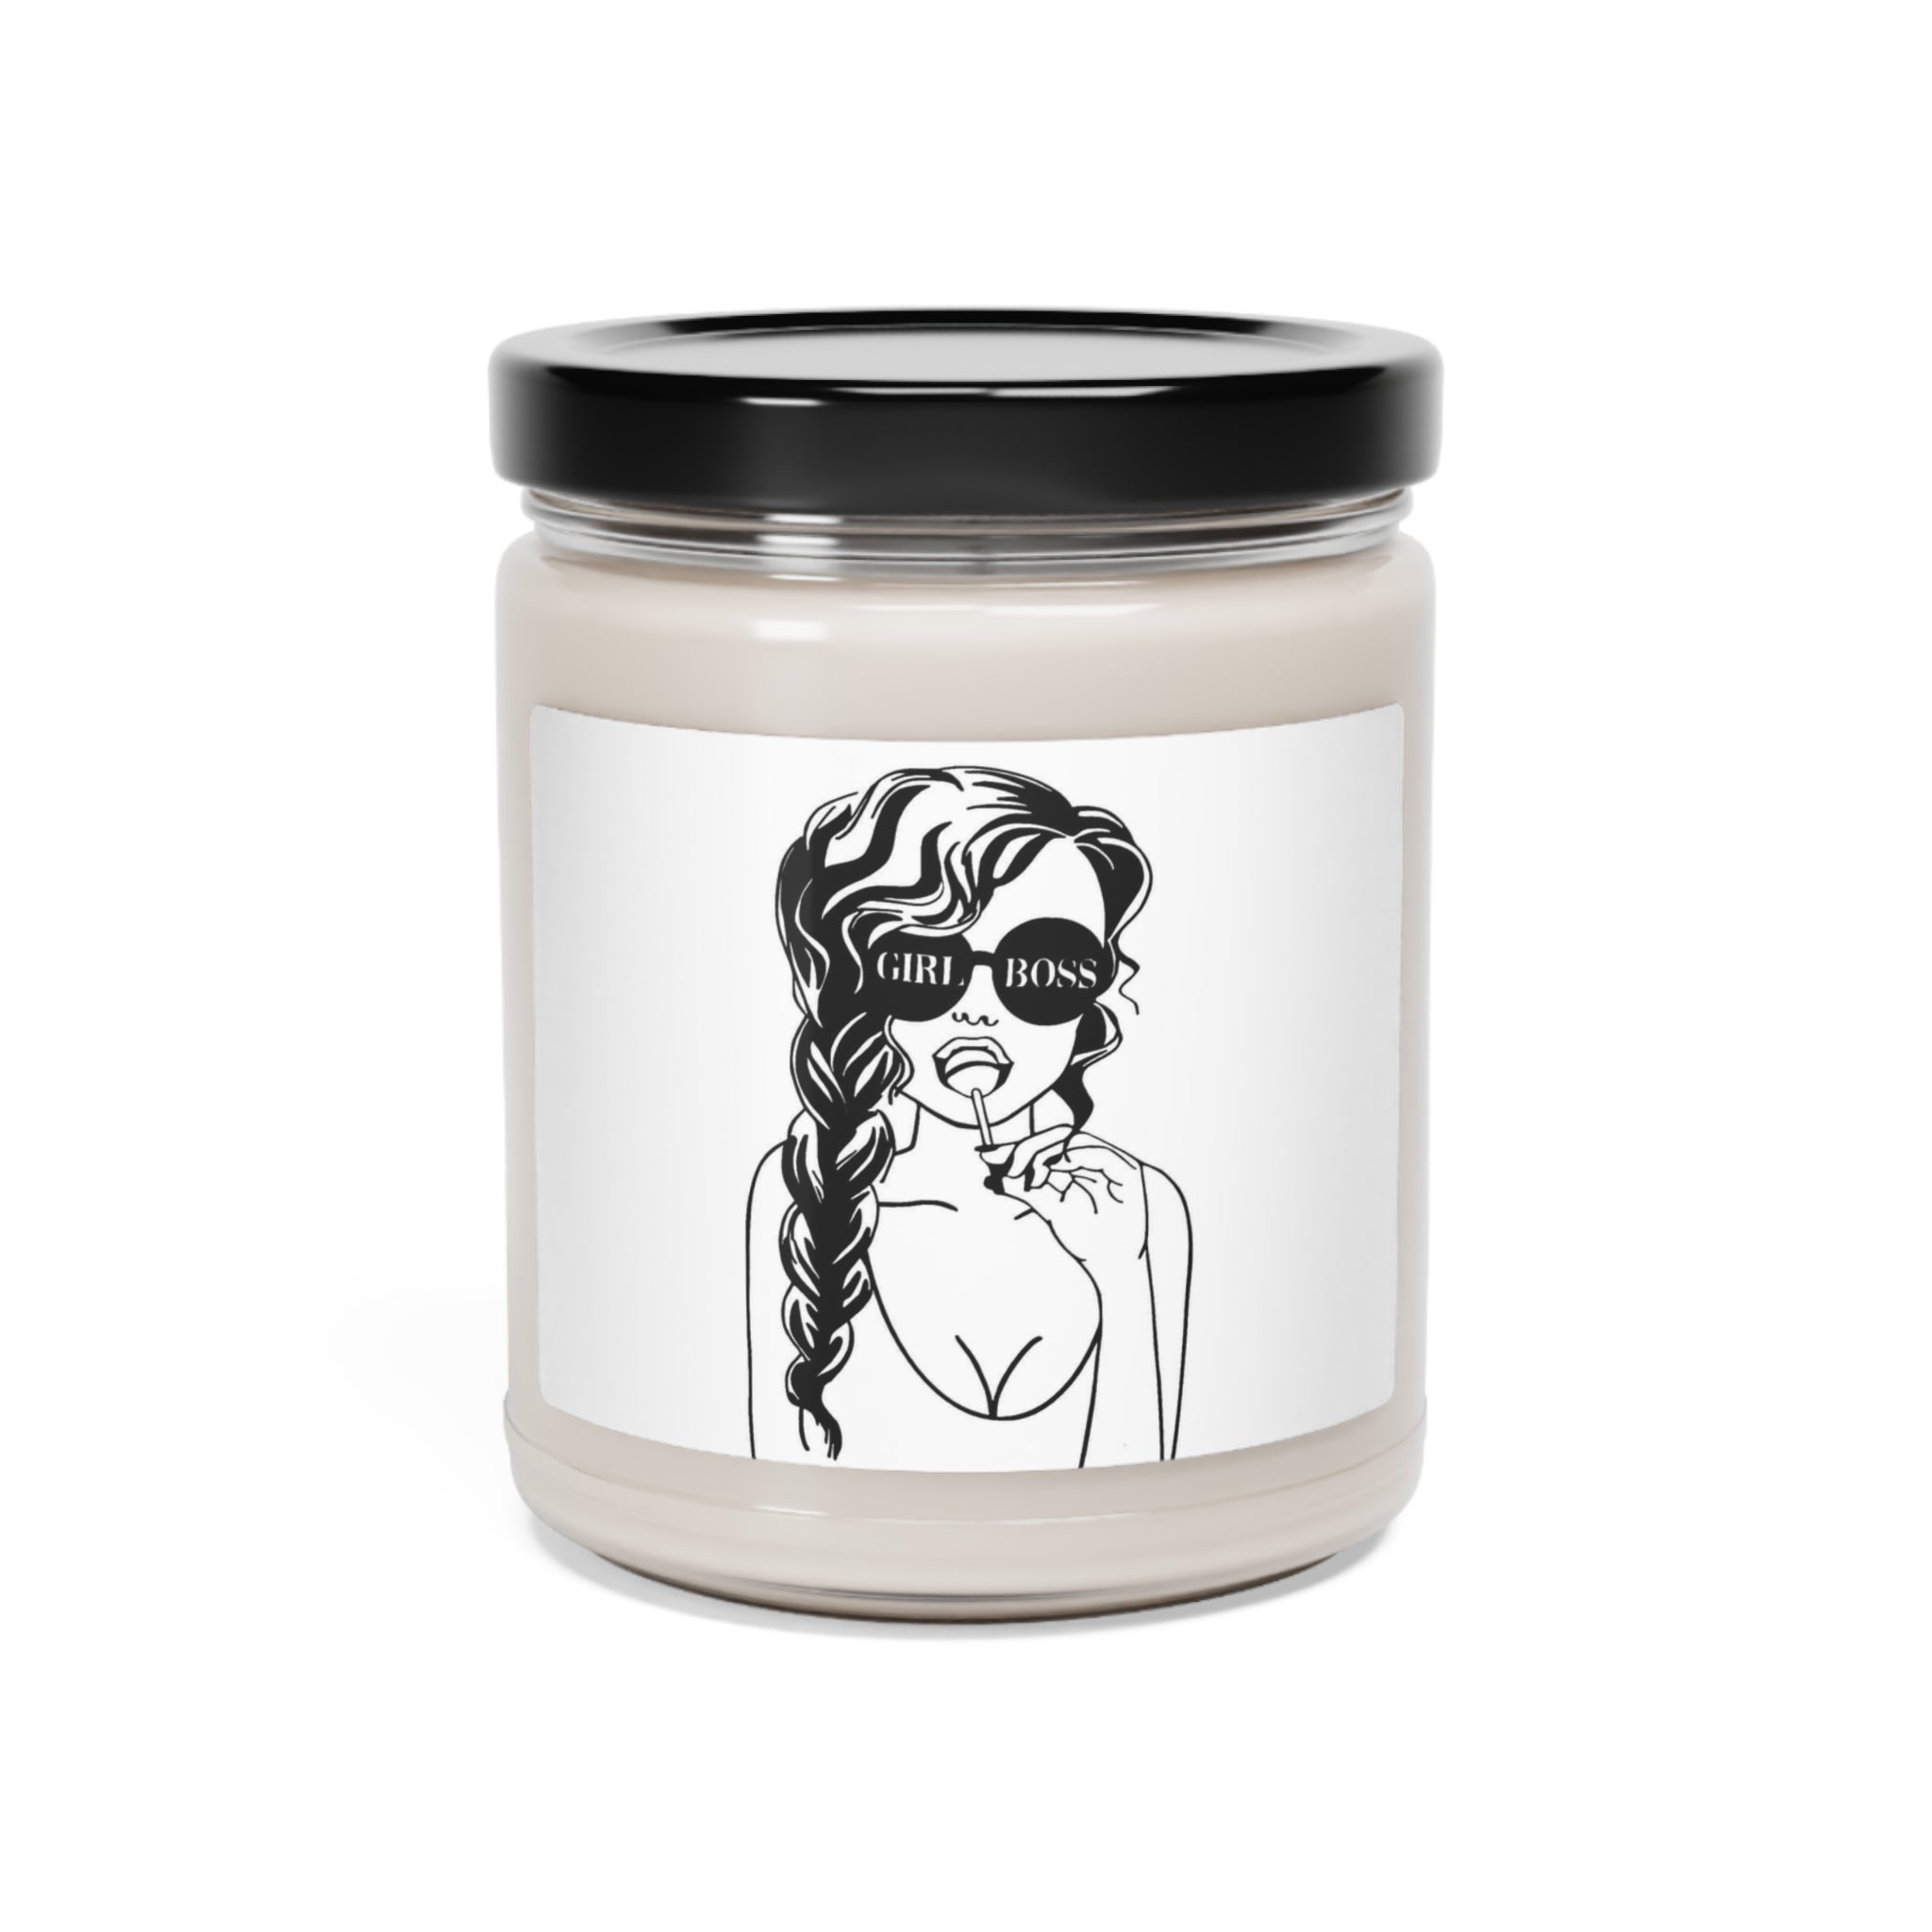 Girl Boss Scented Soy Candle, 9oz